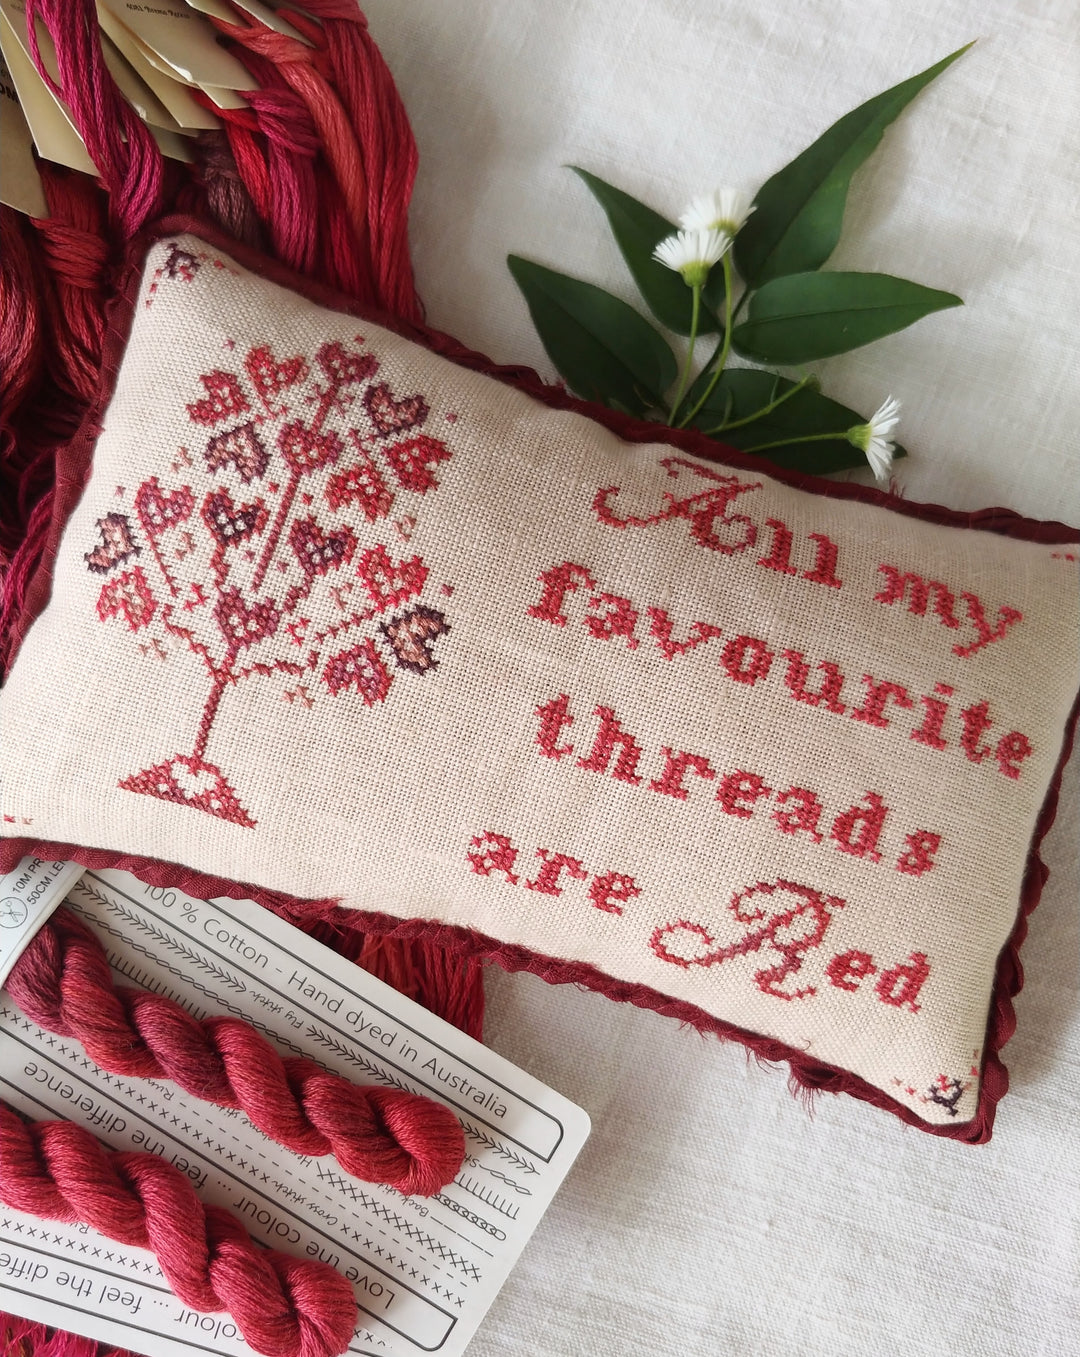 All My Red Threads | Mojo Stitches